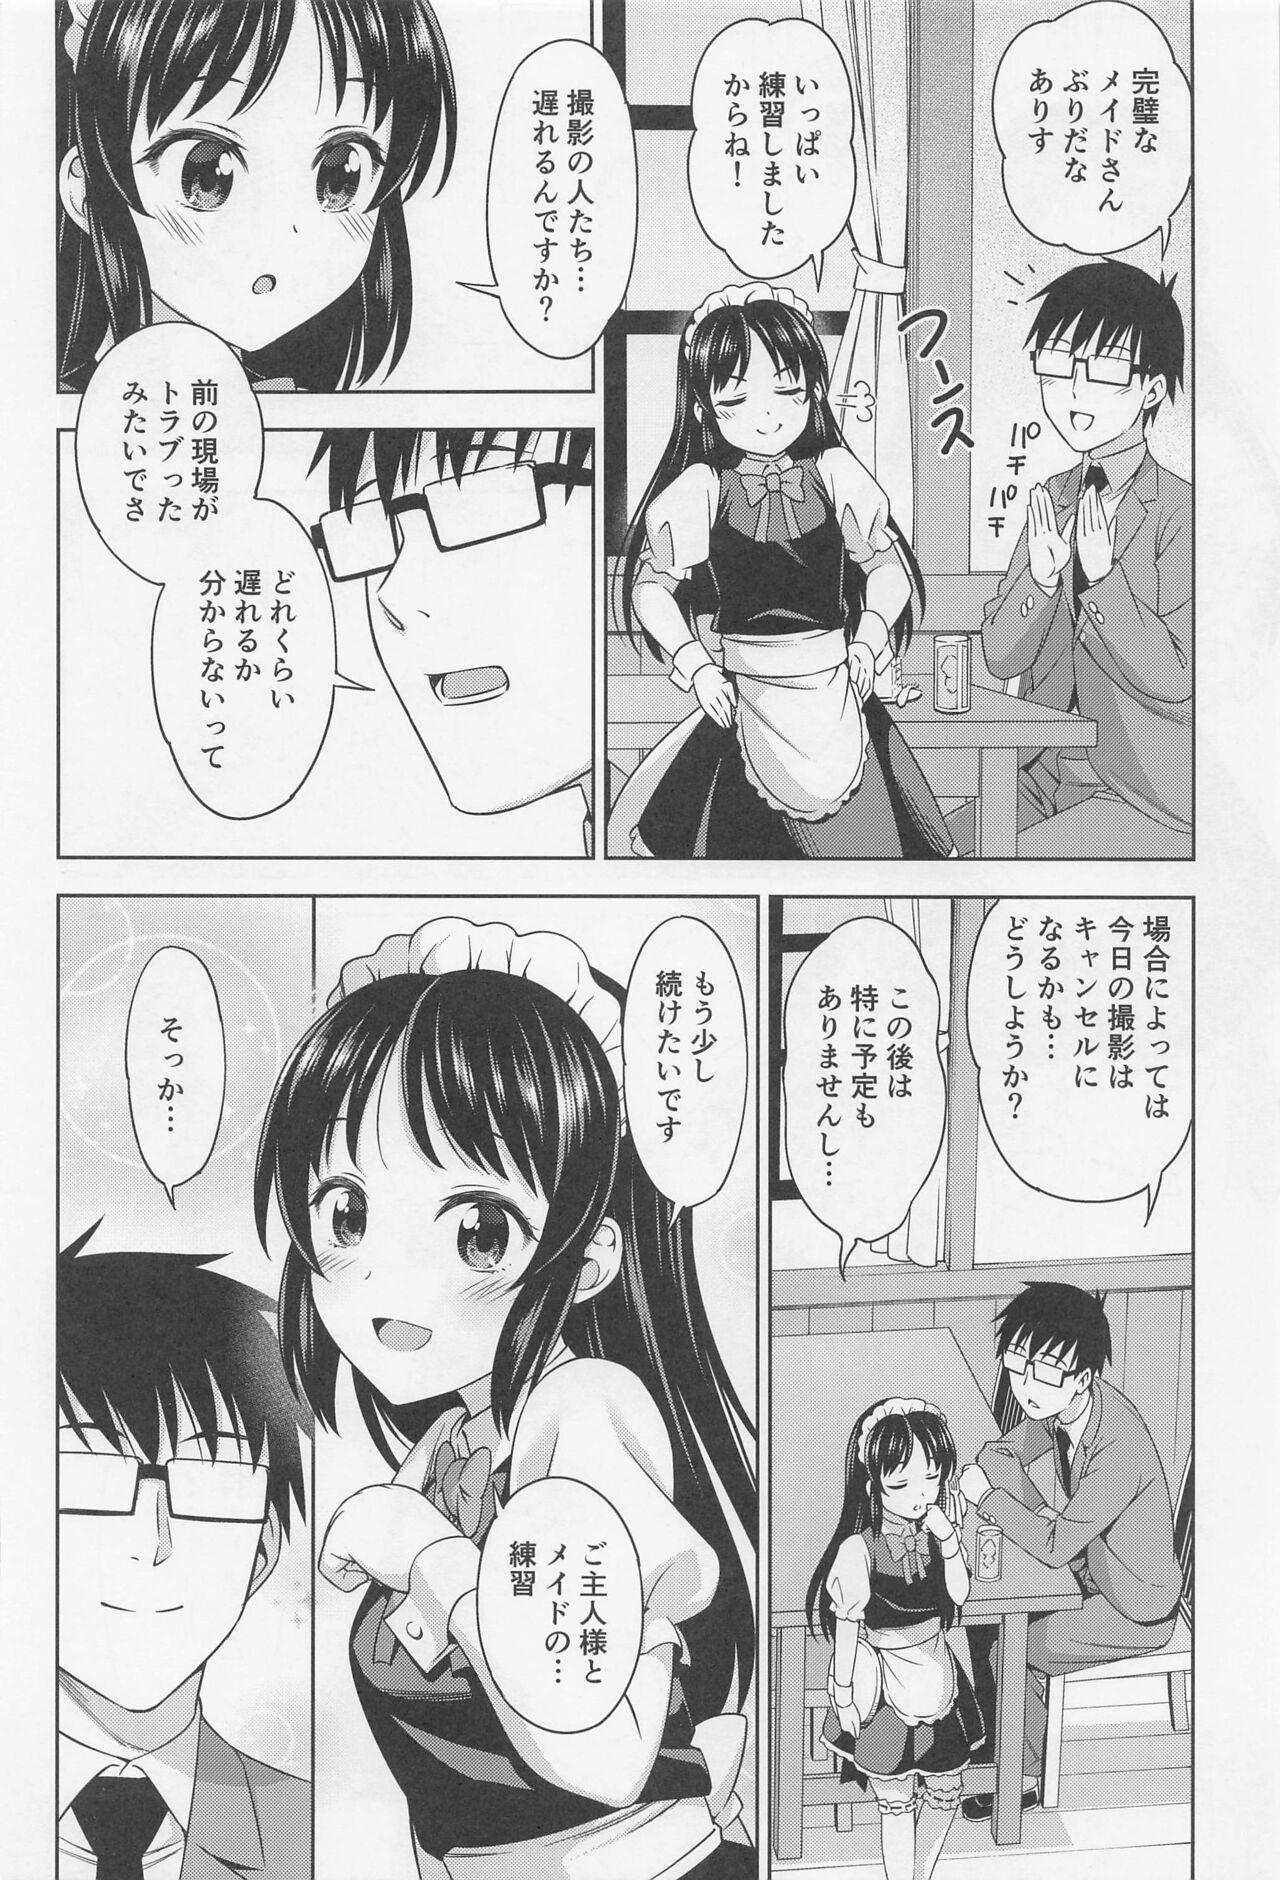 Hot Teen Cafe Tachibana e Youkoso - welcome to cafe tatibana - The idolmaster Cumload - Page 3